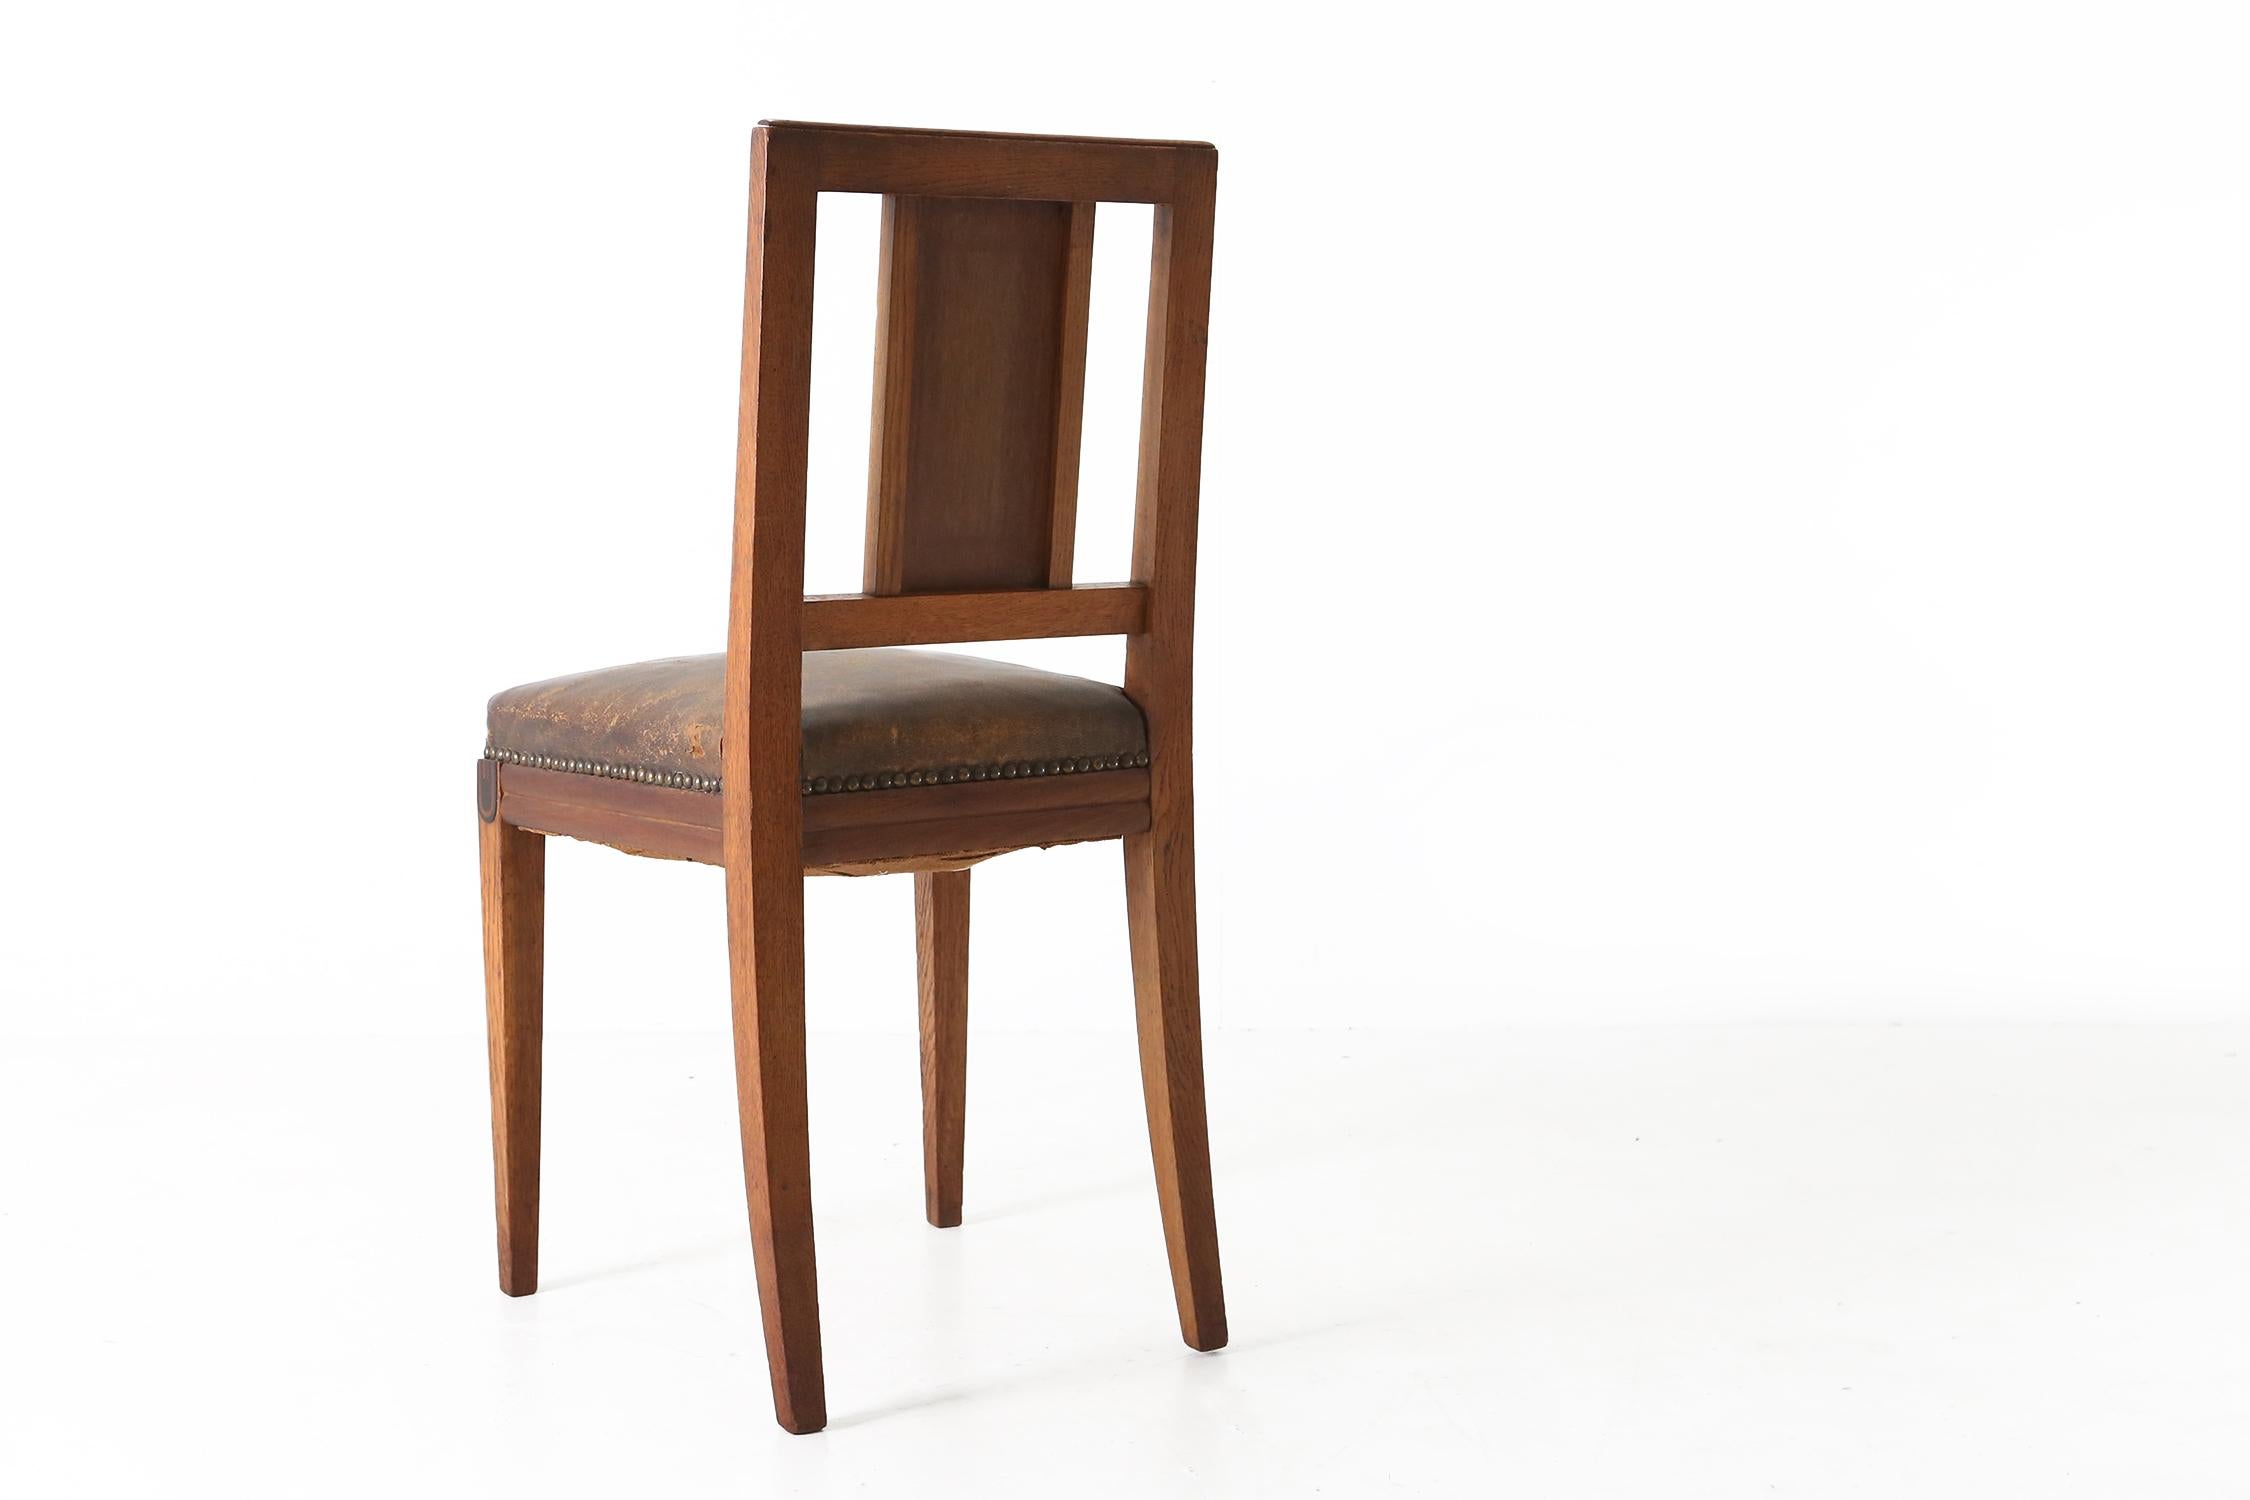 Art Deco Chair by Maurice Dufrene, 1925 In Good Condition For Sale In Meulebeke, BE